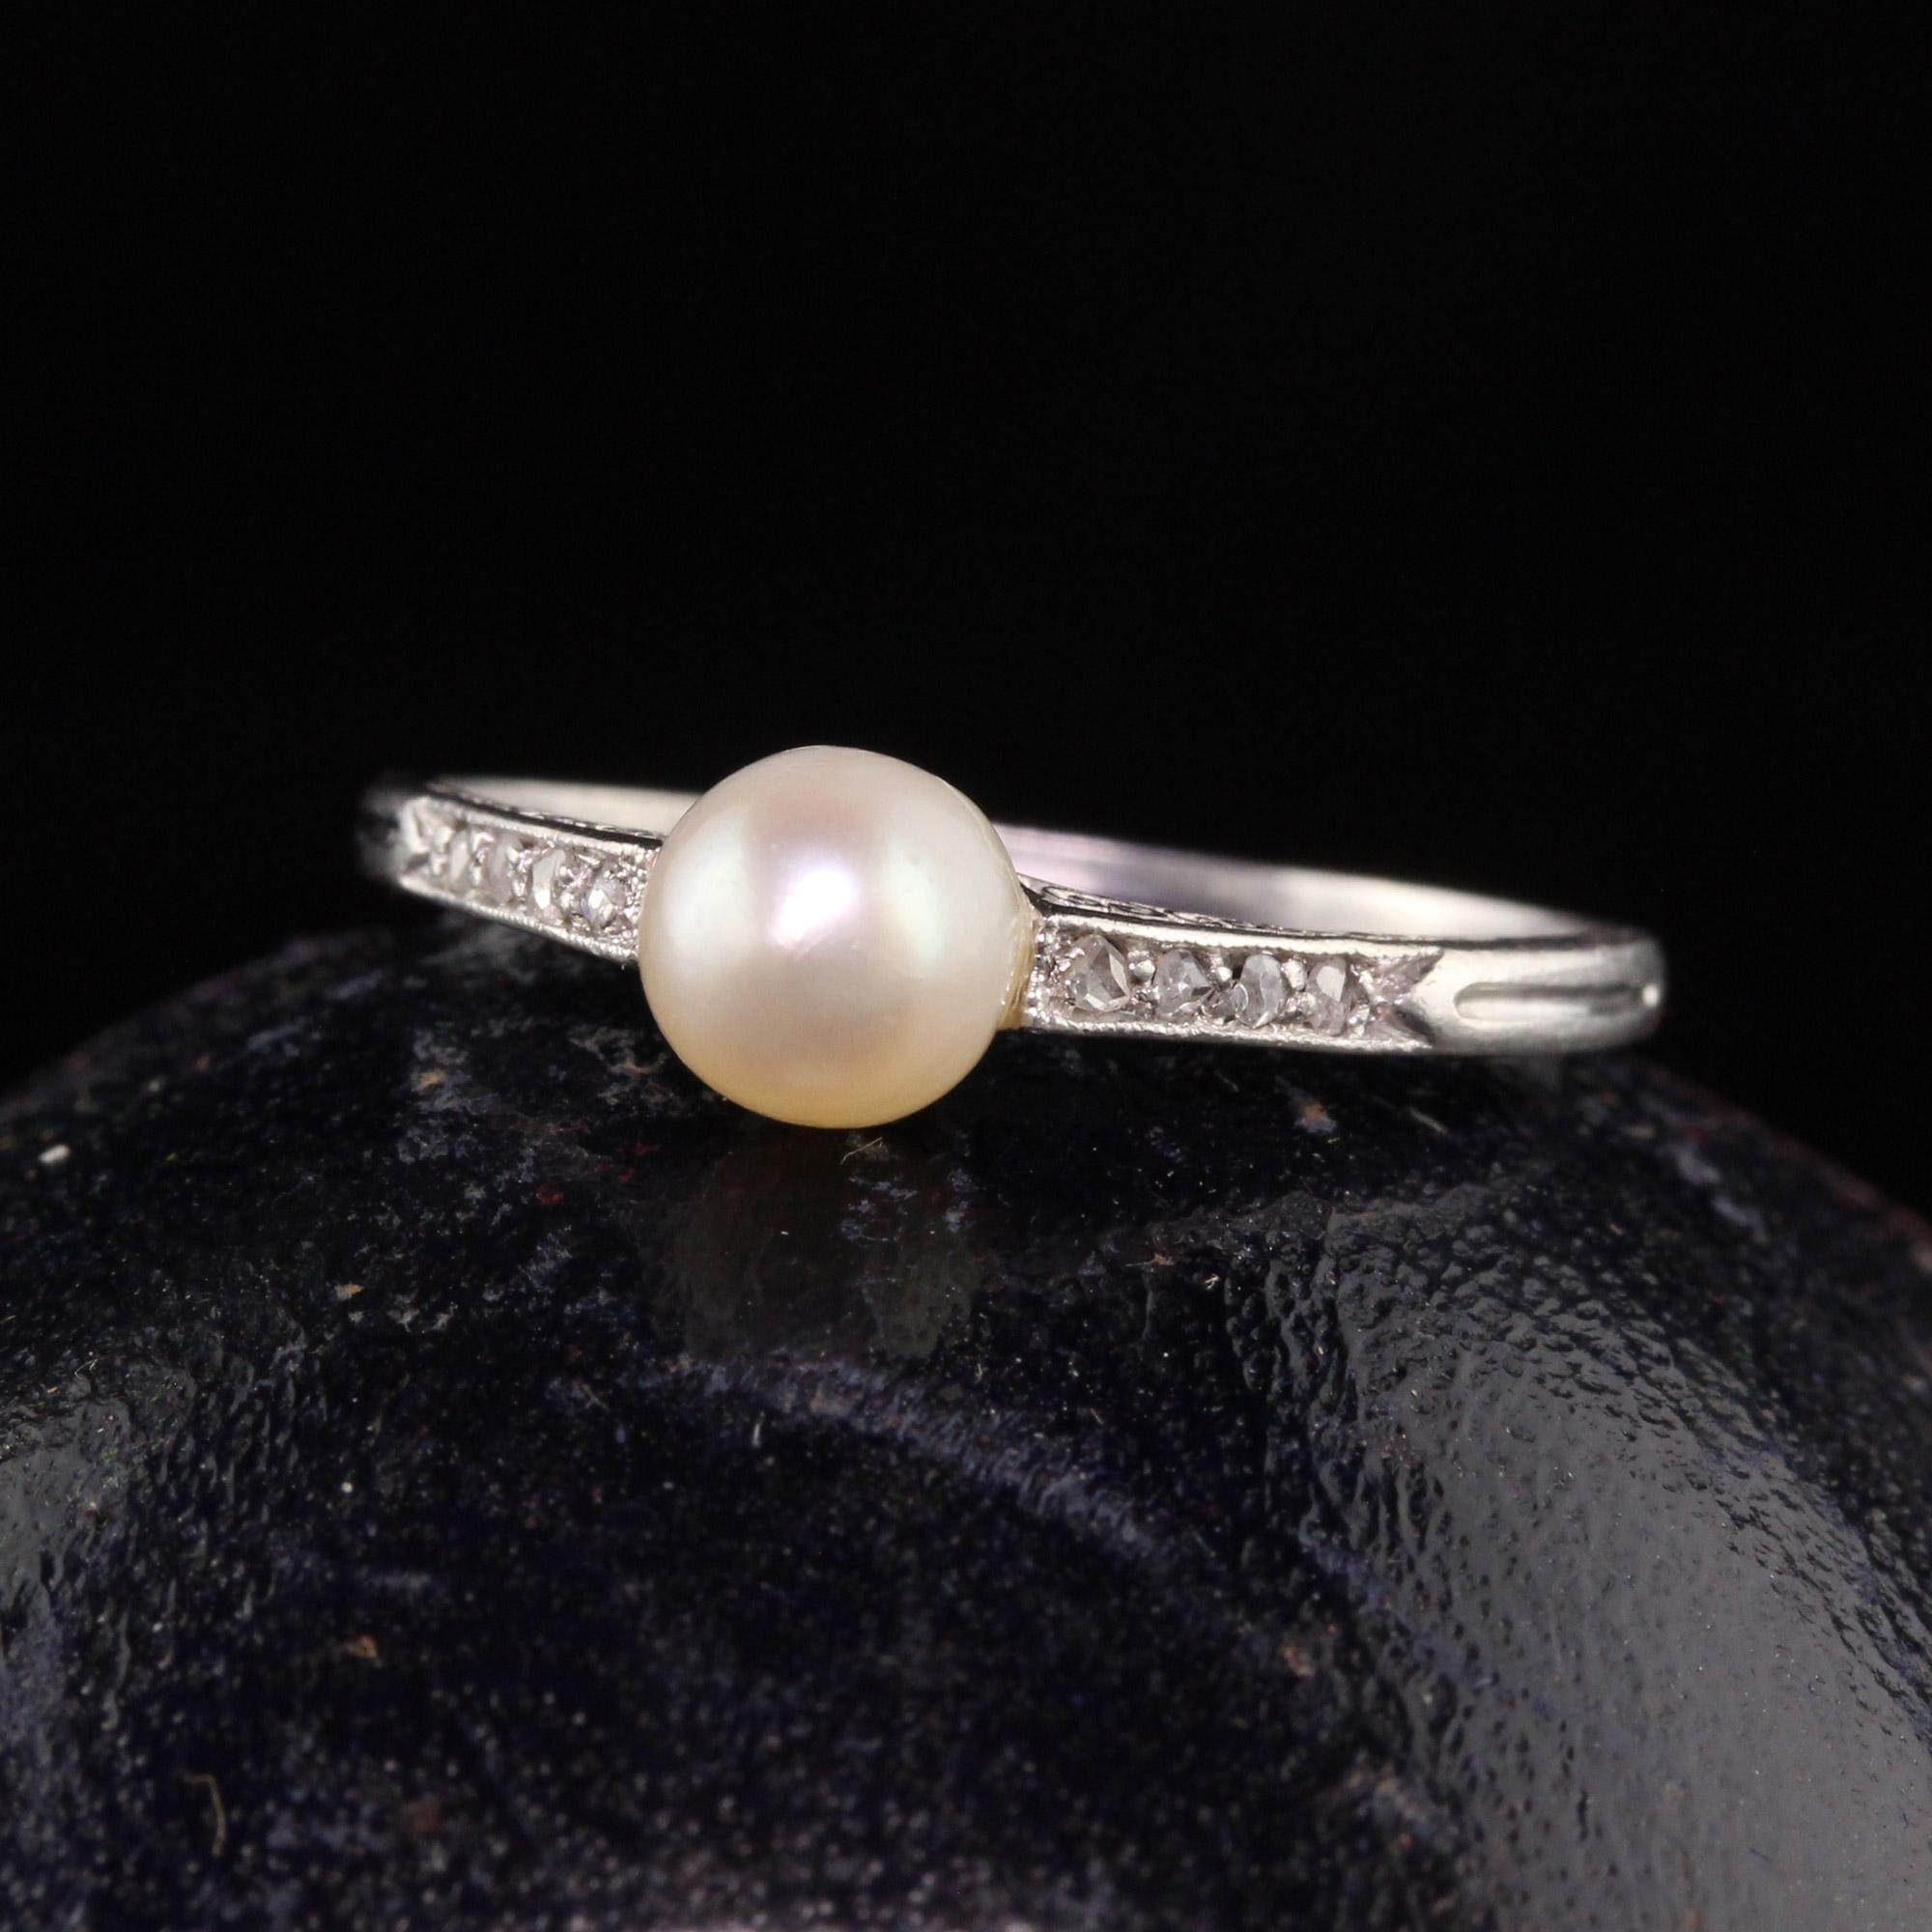 Beautiful Antique Art Deco Platinum Natural Pearl and Diamond Engagement Ring. This gorgeous Art Deco ring features a natural pearl center with rose cut diamonds on the sides. The sides of the ring are engraved as well beautifully.

Item